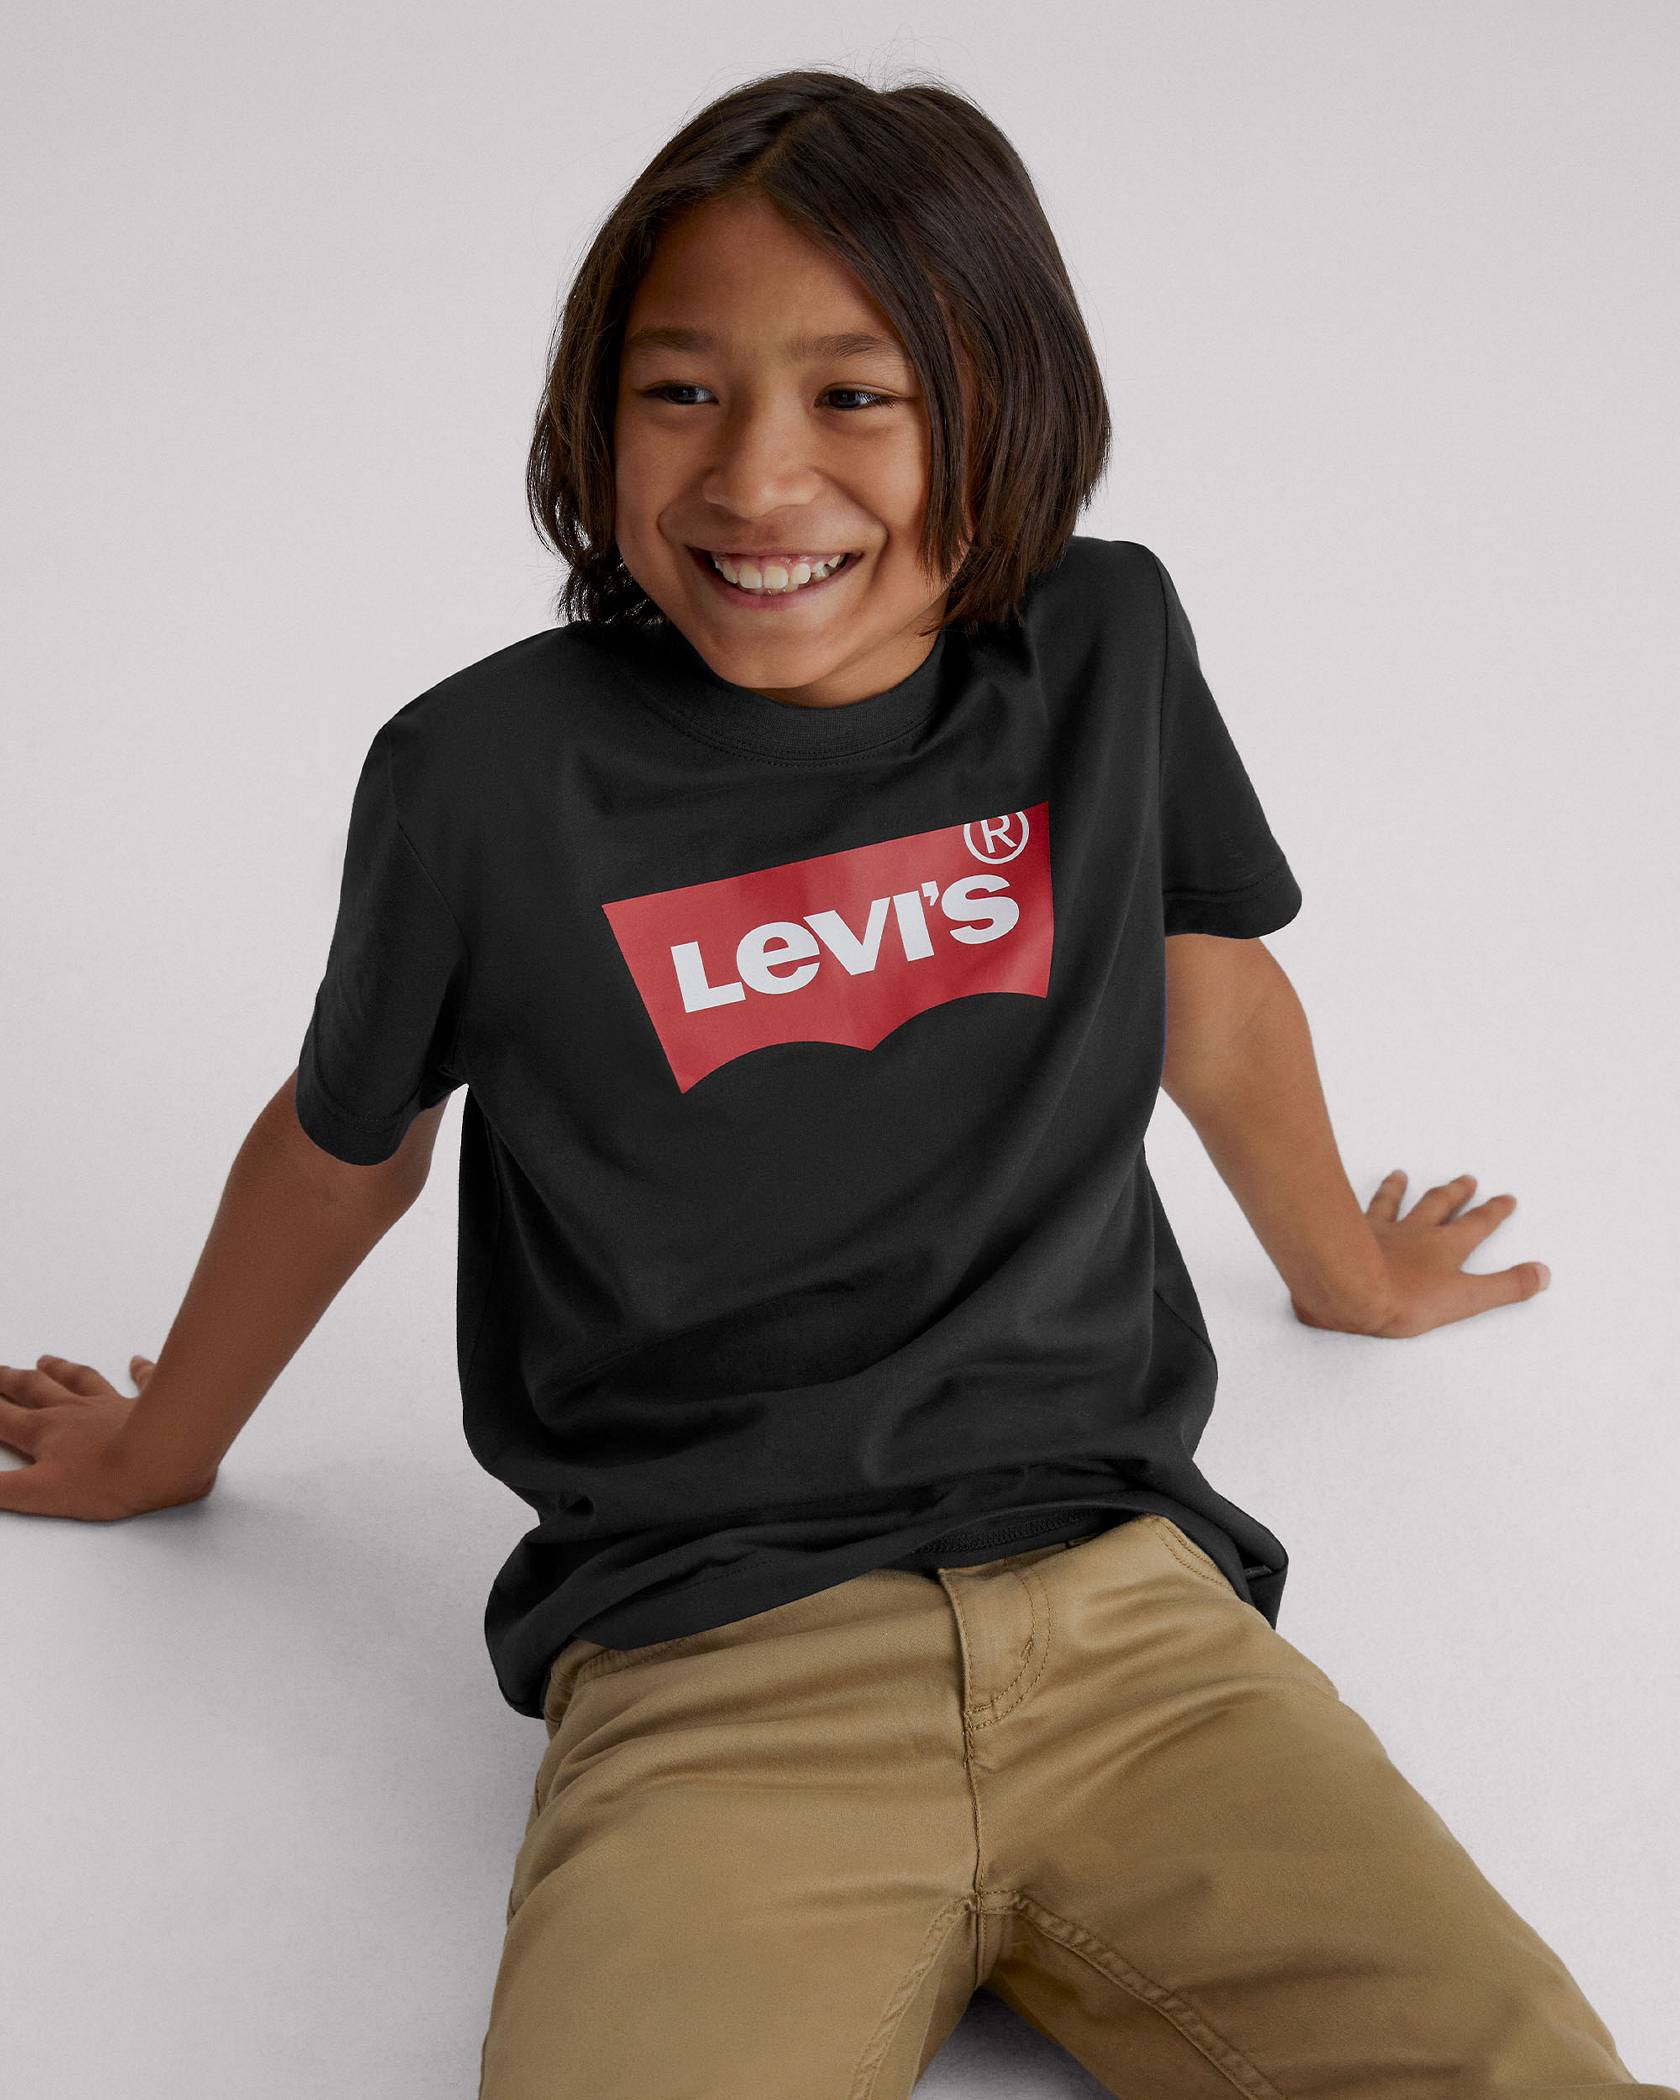 Model sitting on the ground in kids' khaki pants and black logo batwing tee